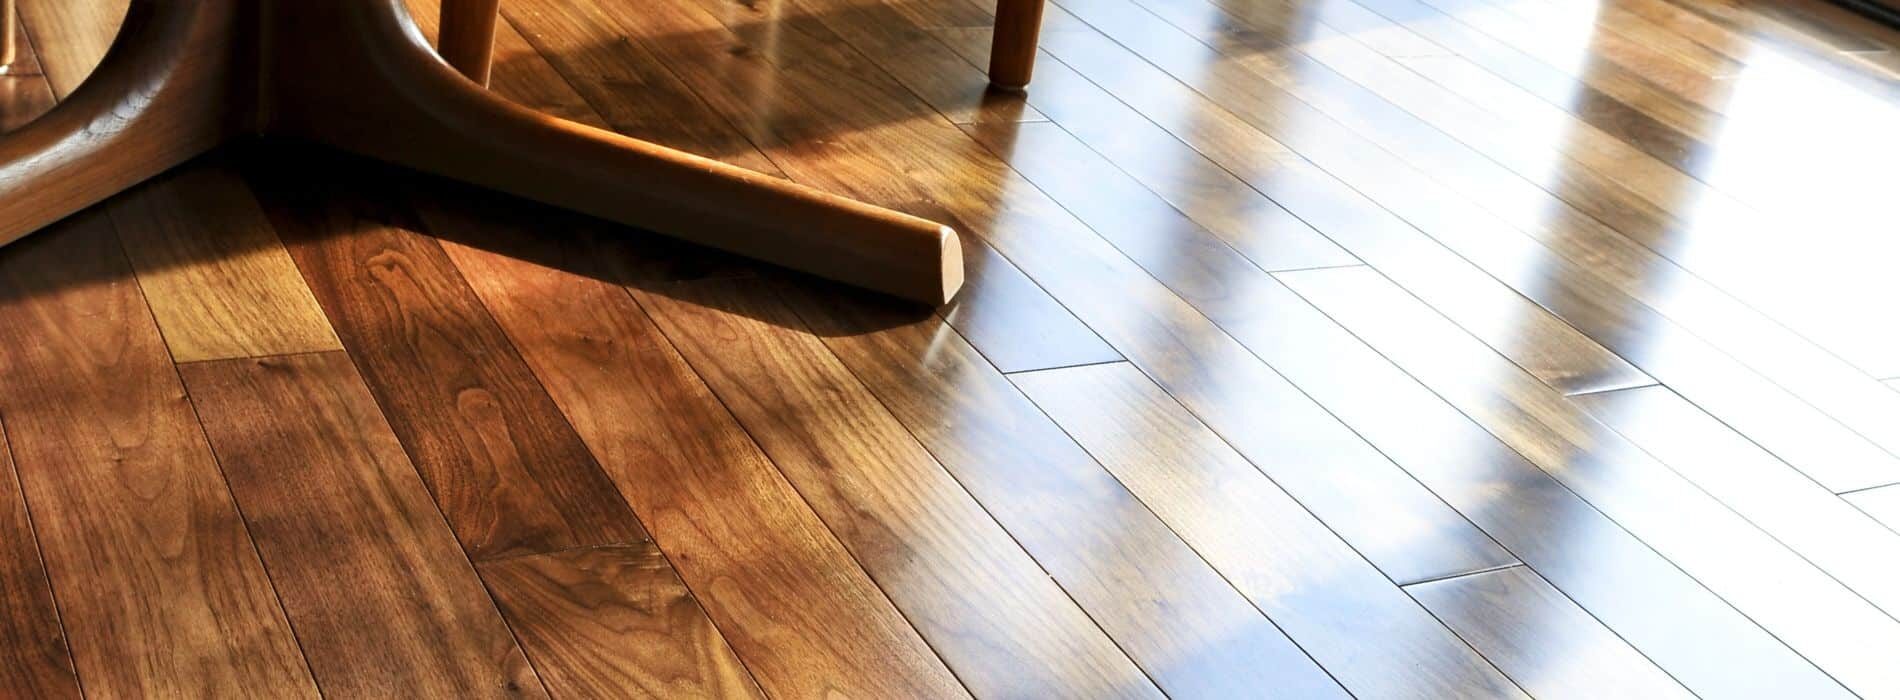 A close-up of a wooden floor with a chair. 